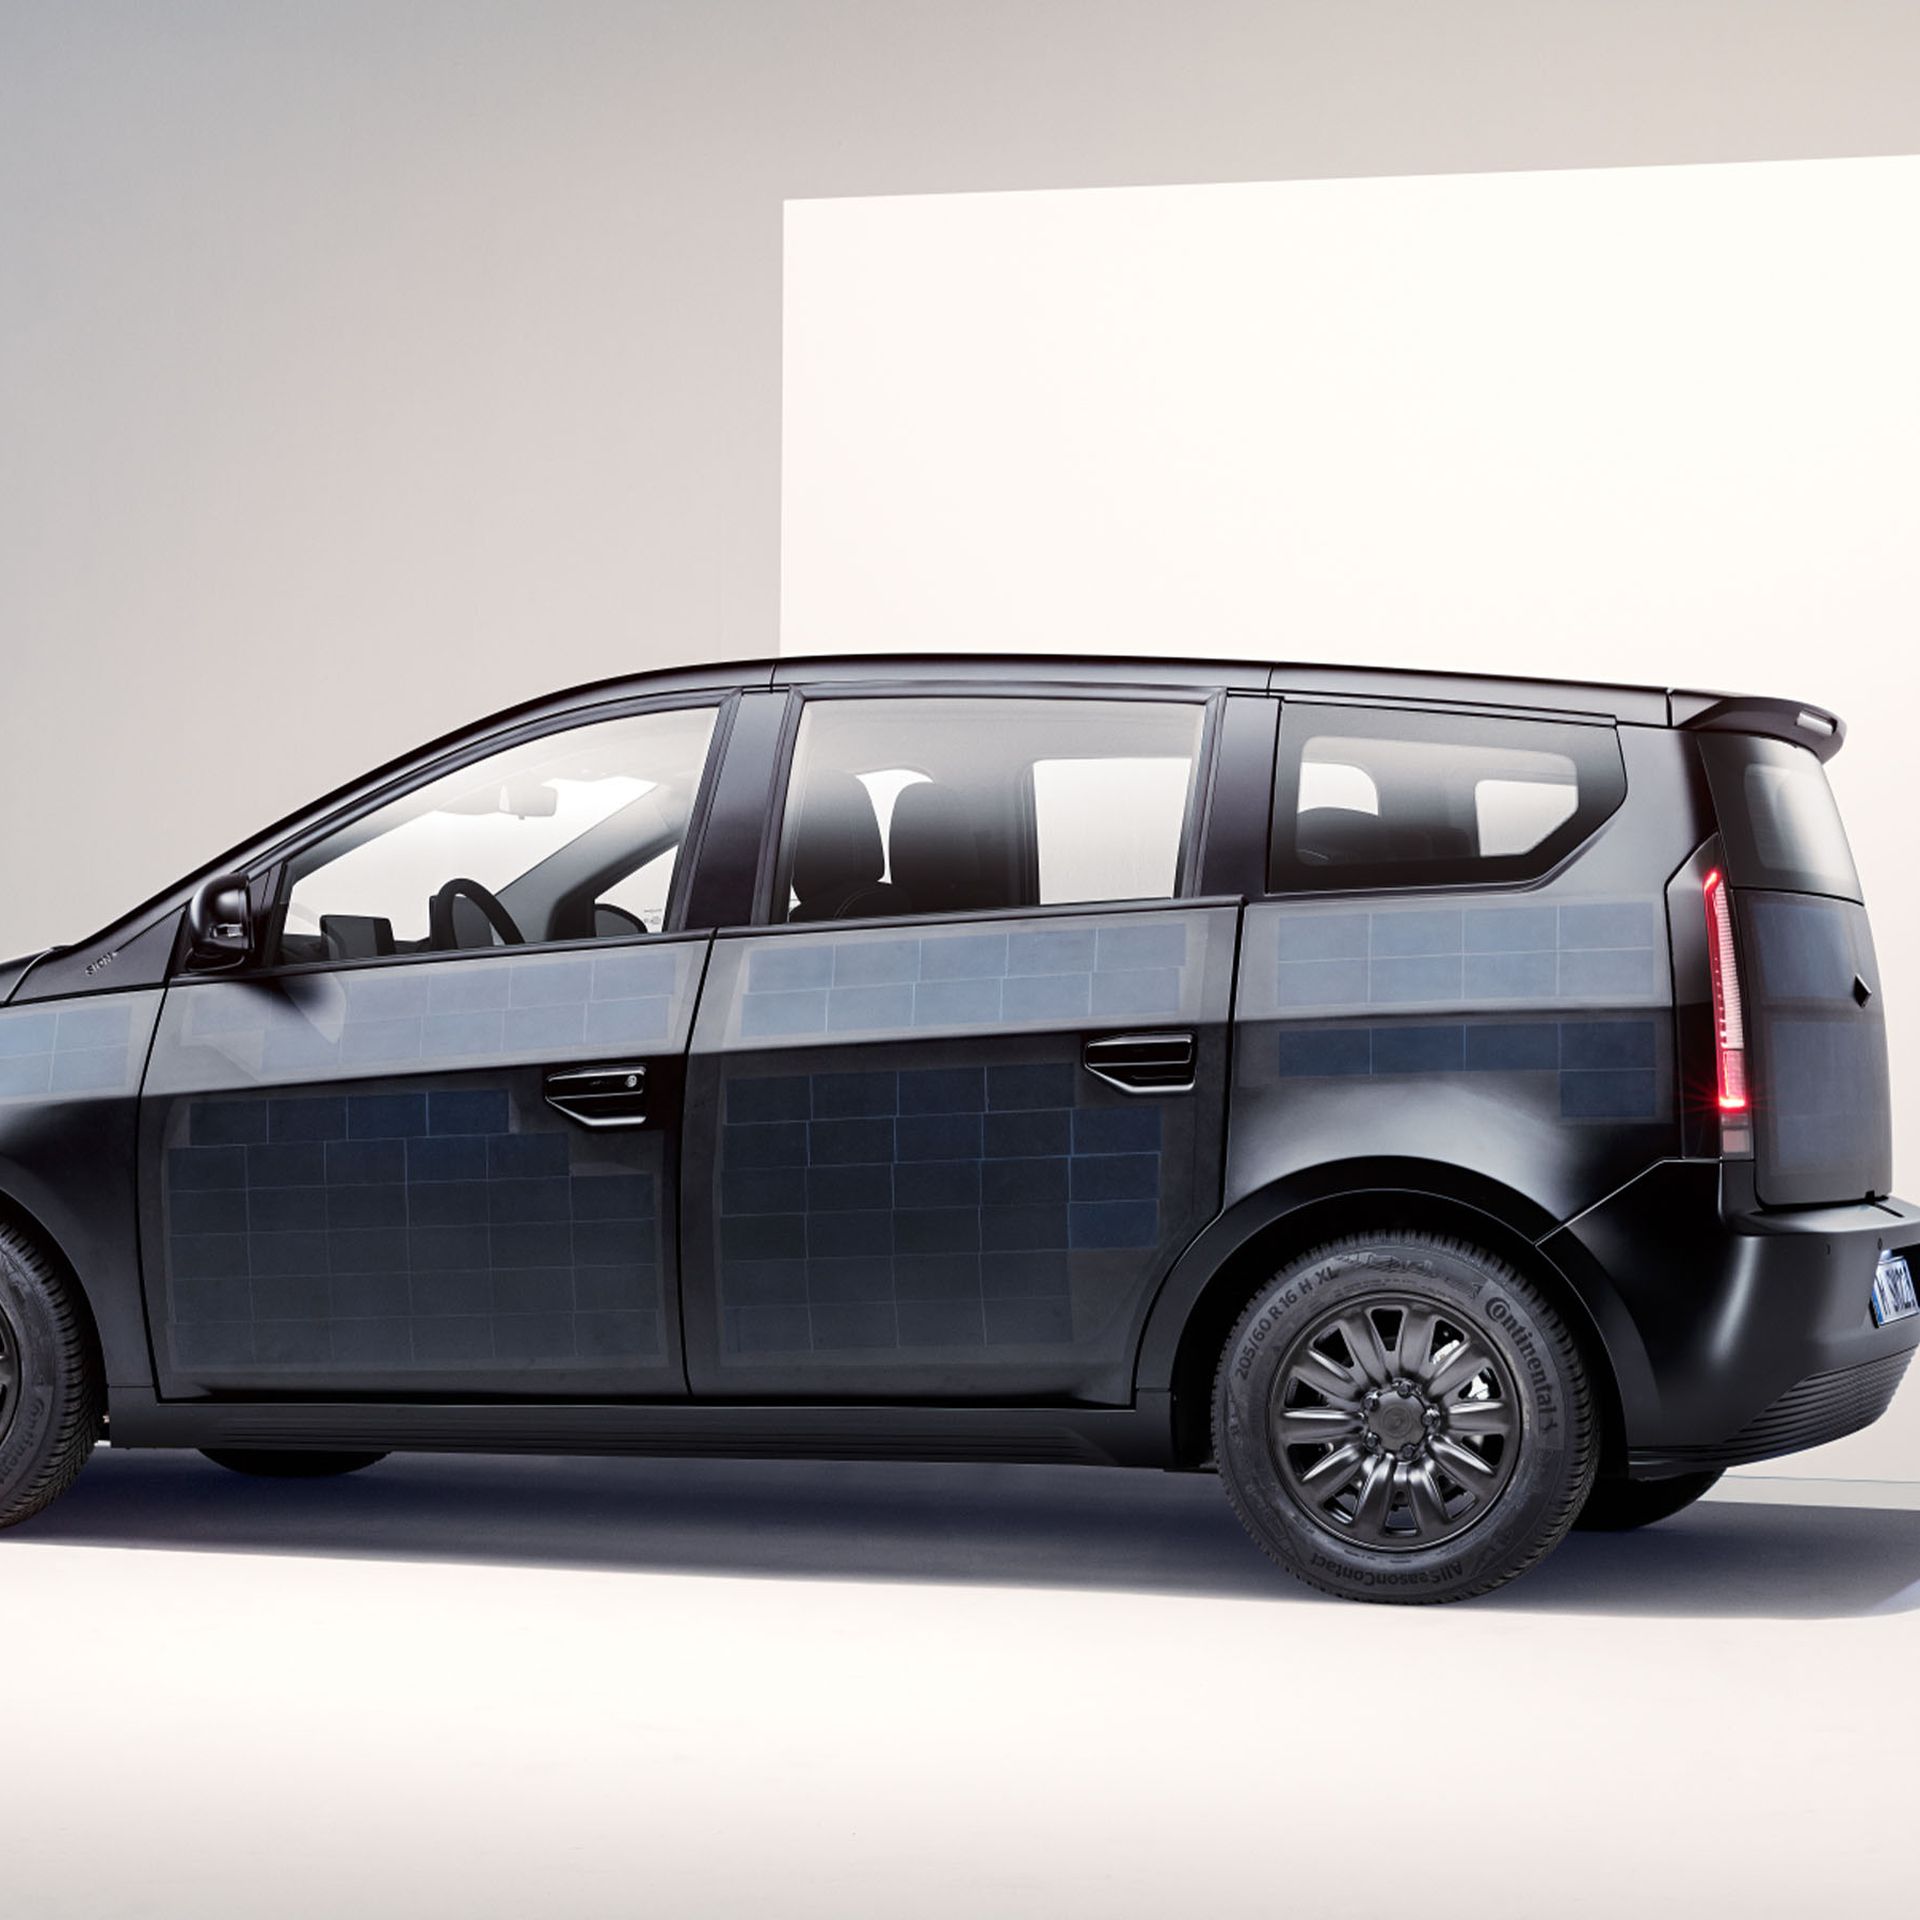 Image of the Sono Sion, a solar-powered SUV from German startup Sono Motors